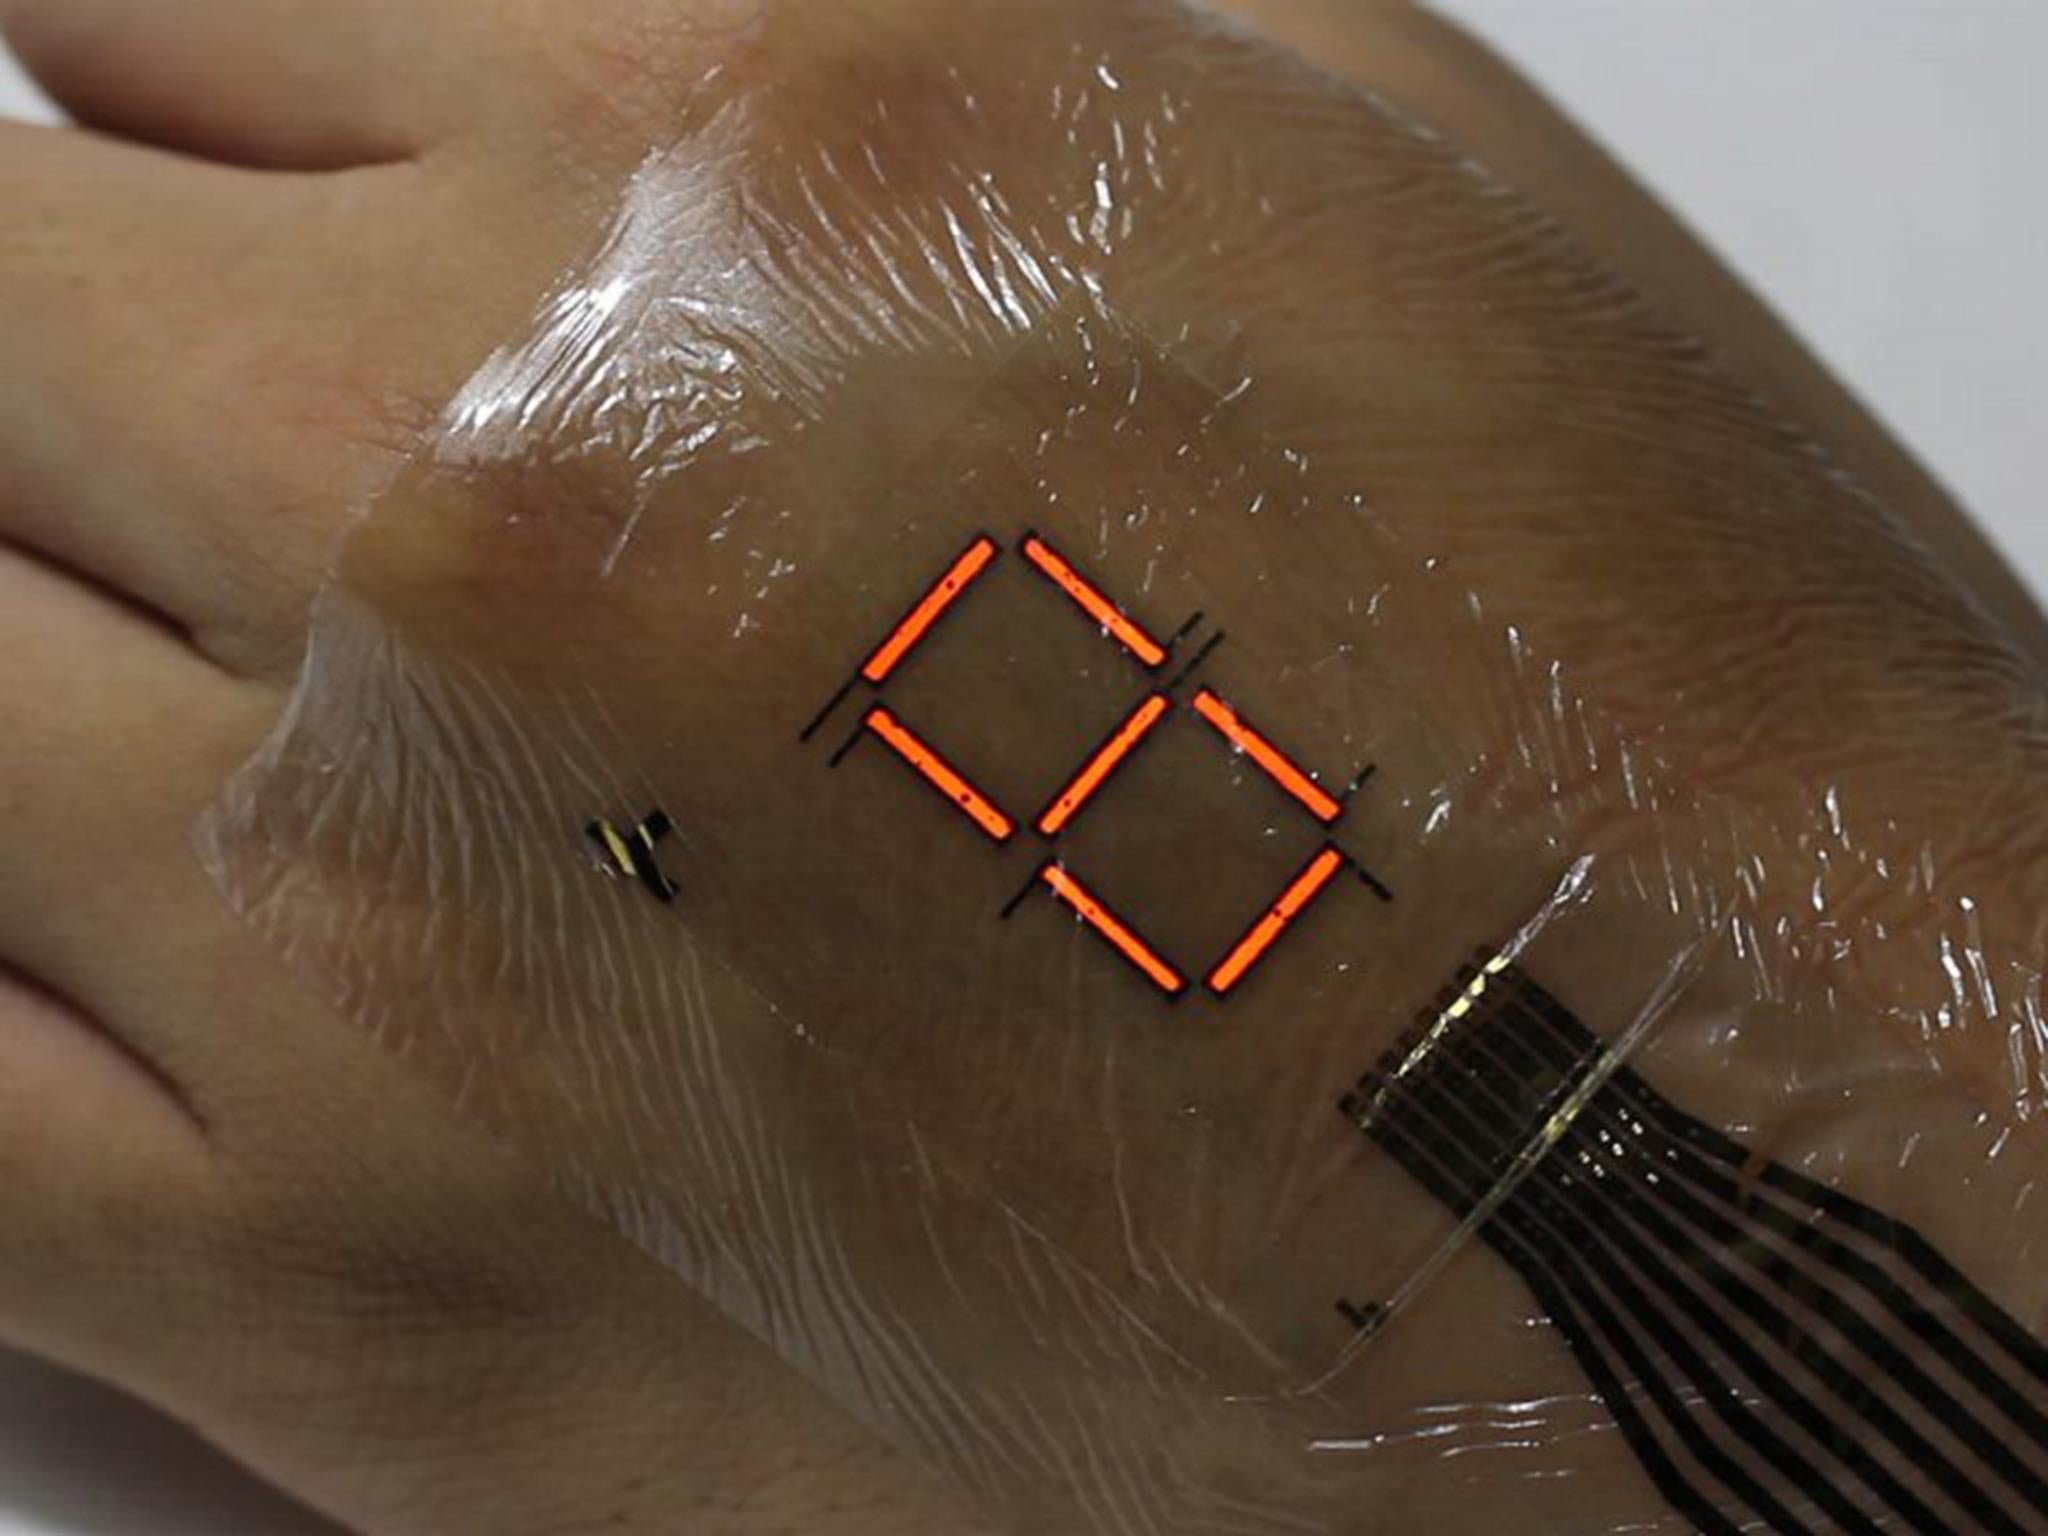 The ‘optoelectronic skin’ is an ultra-thin, flexible LED display that can be worn on the back of your hand